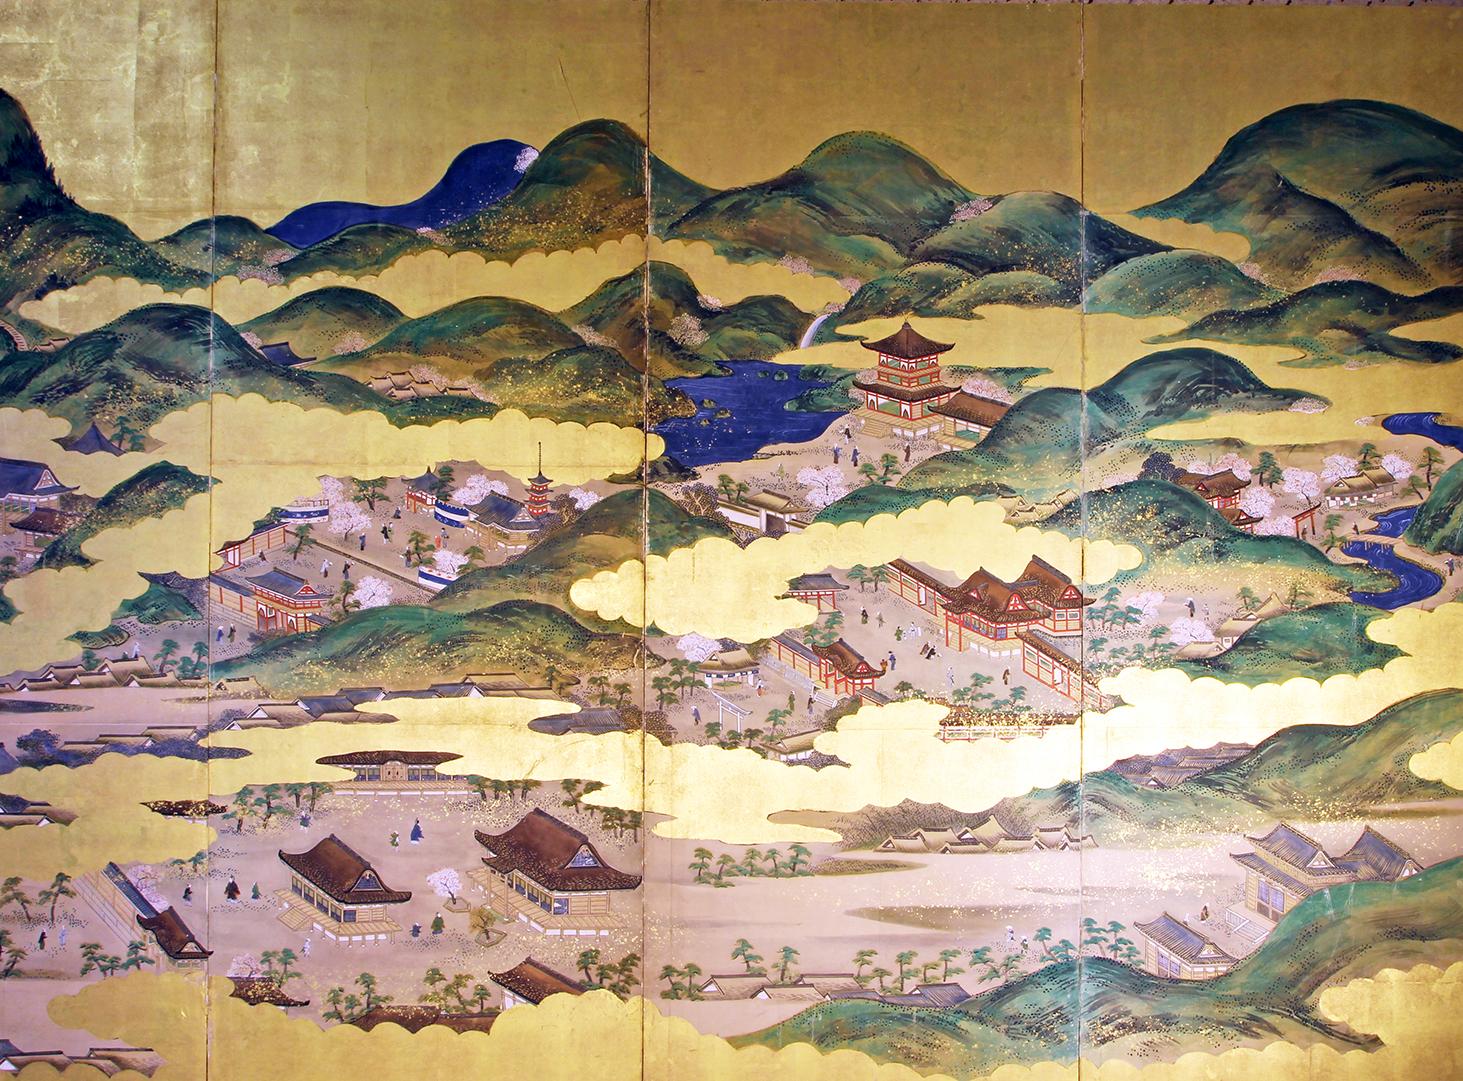 Gold Leaf Tosa School, Japanese Folding Screen Kyoto Old Town Landscape